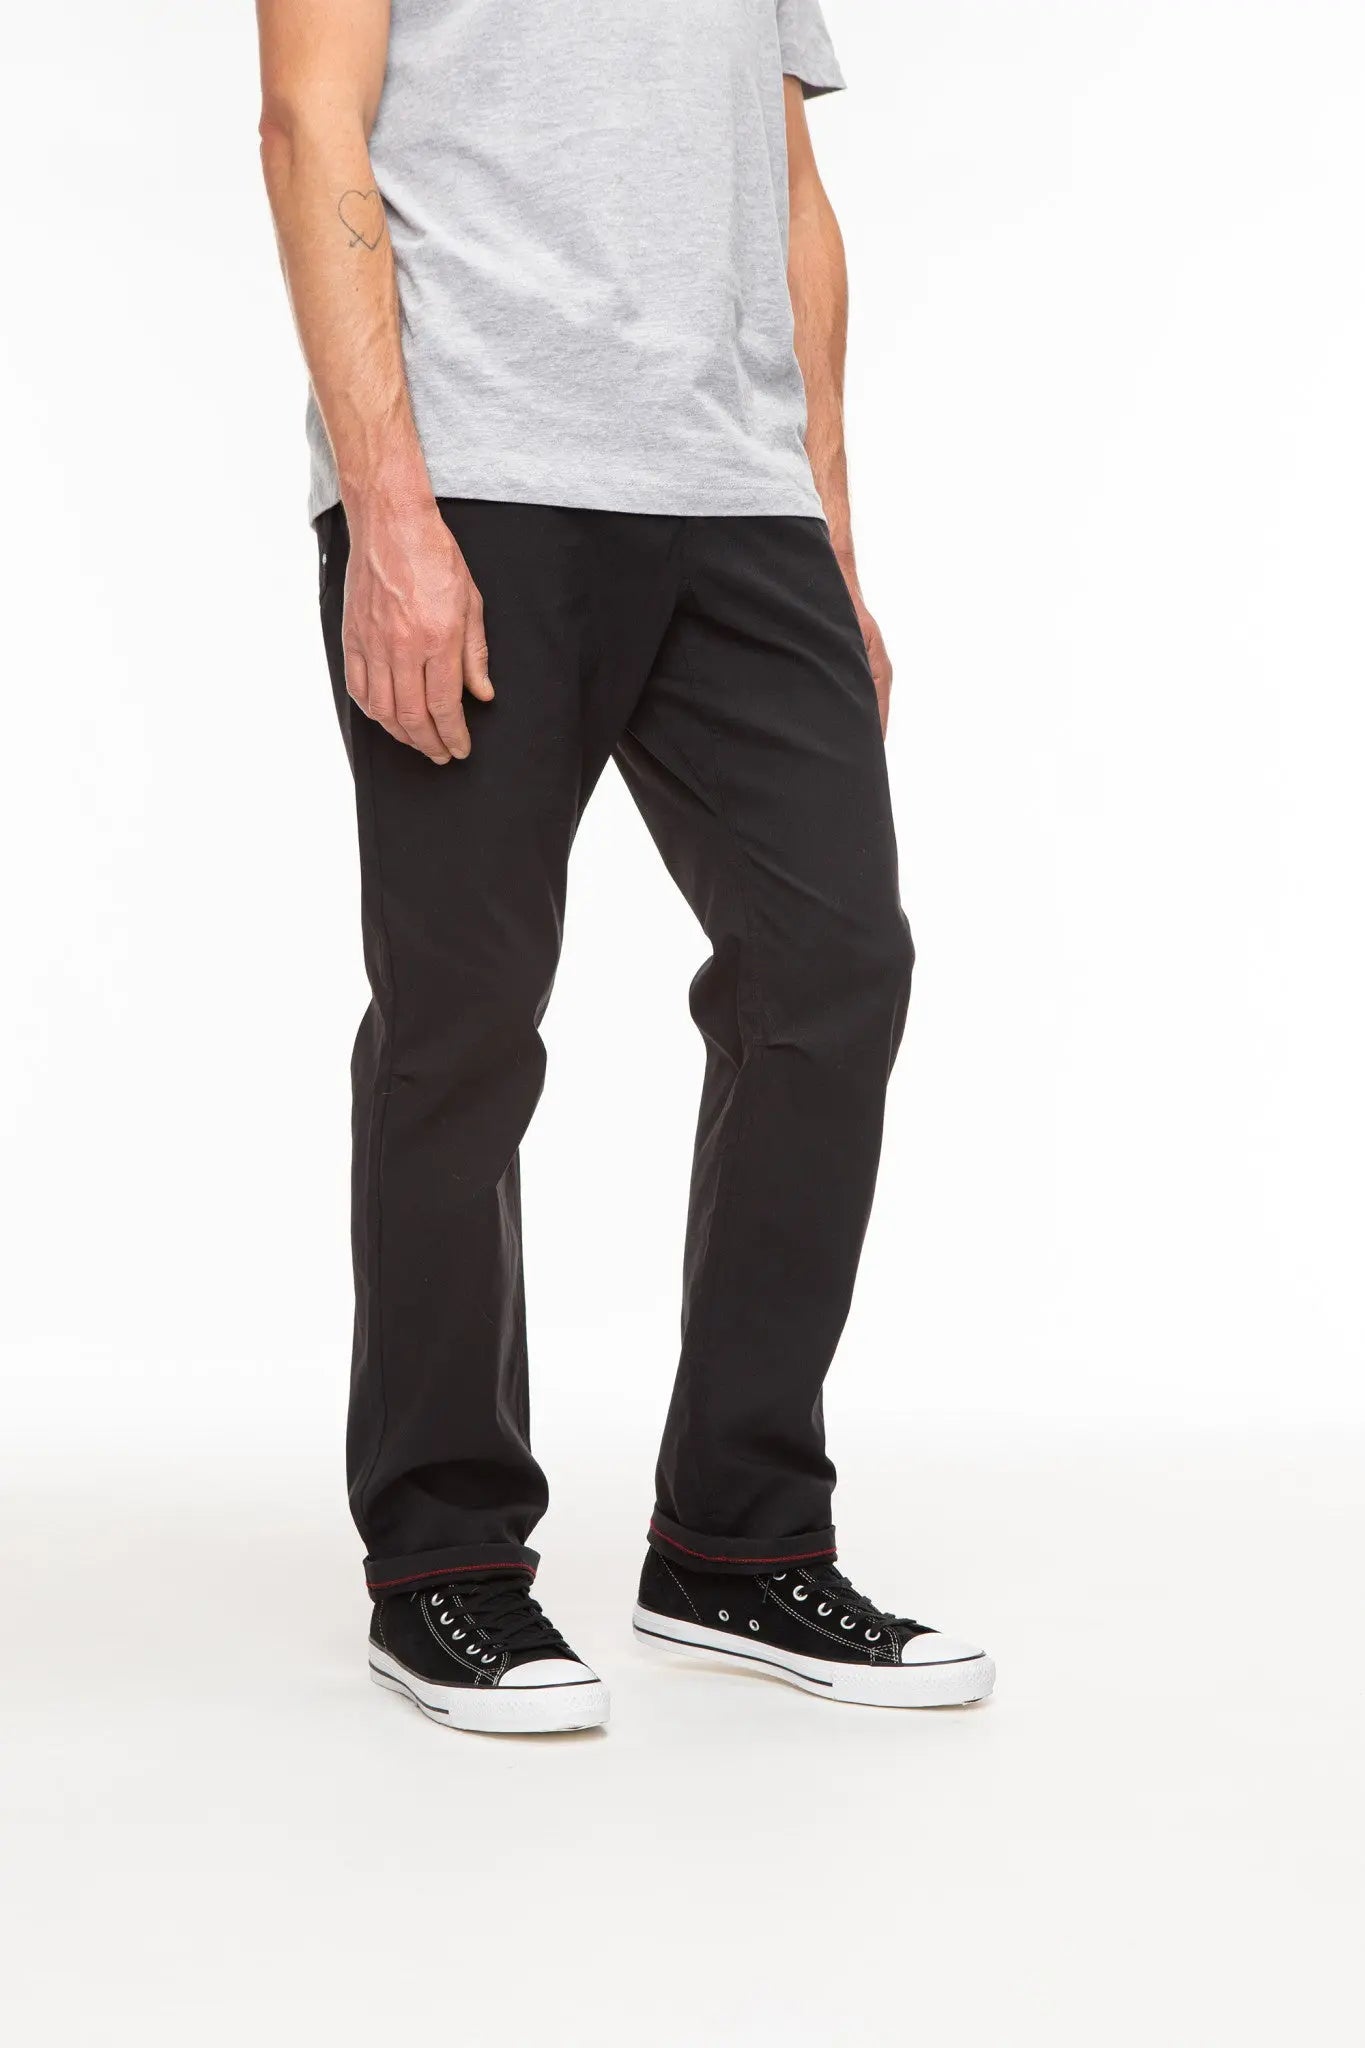 686 Everywhere Pant - Relax Fit Black 686